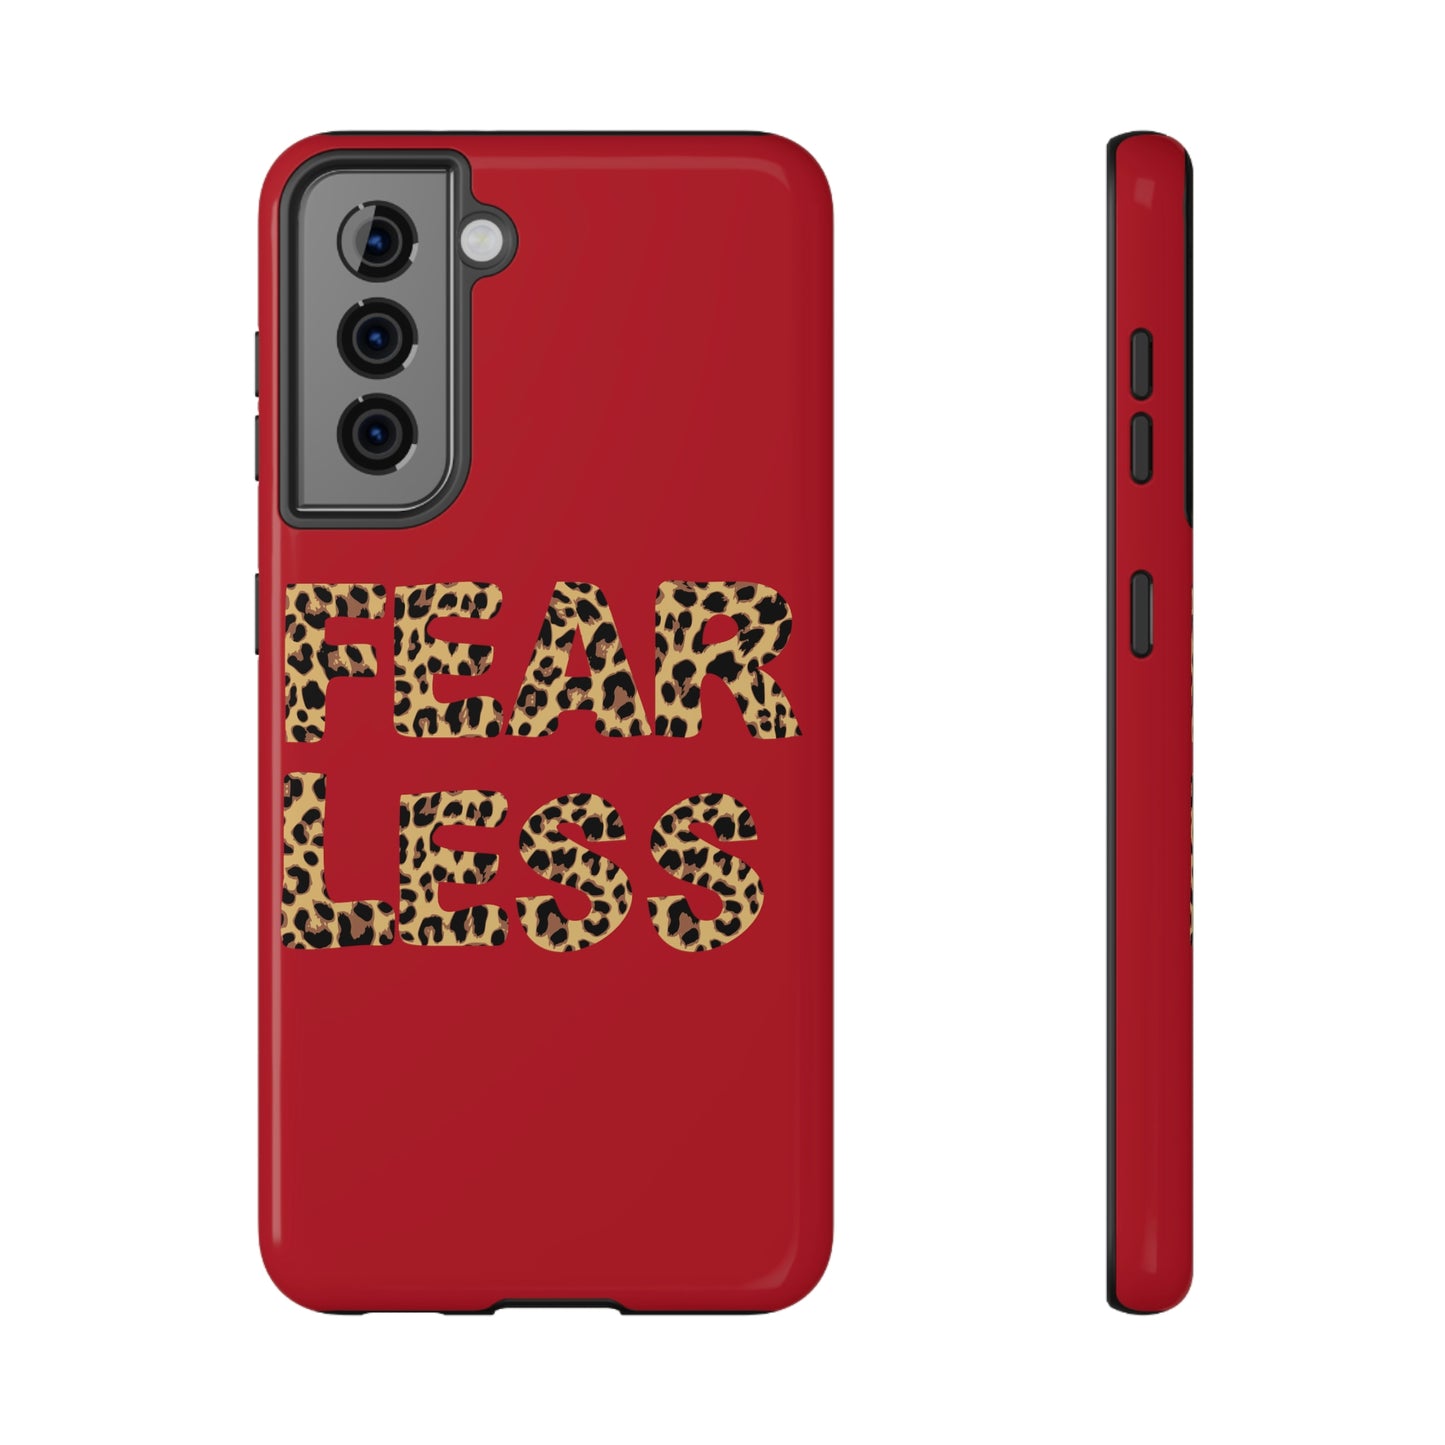 Fearless cases